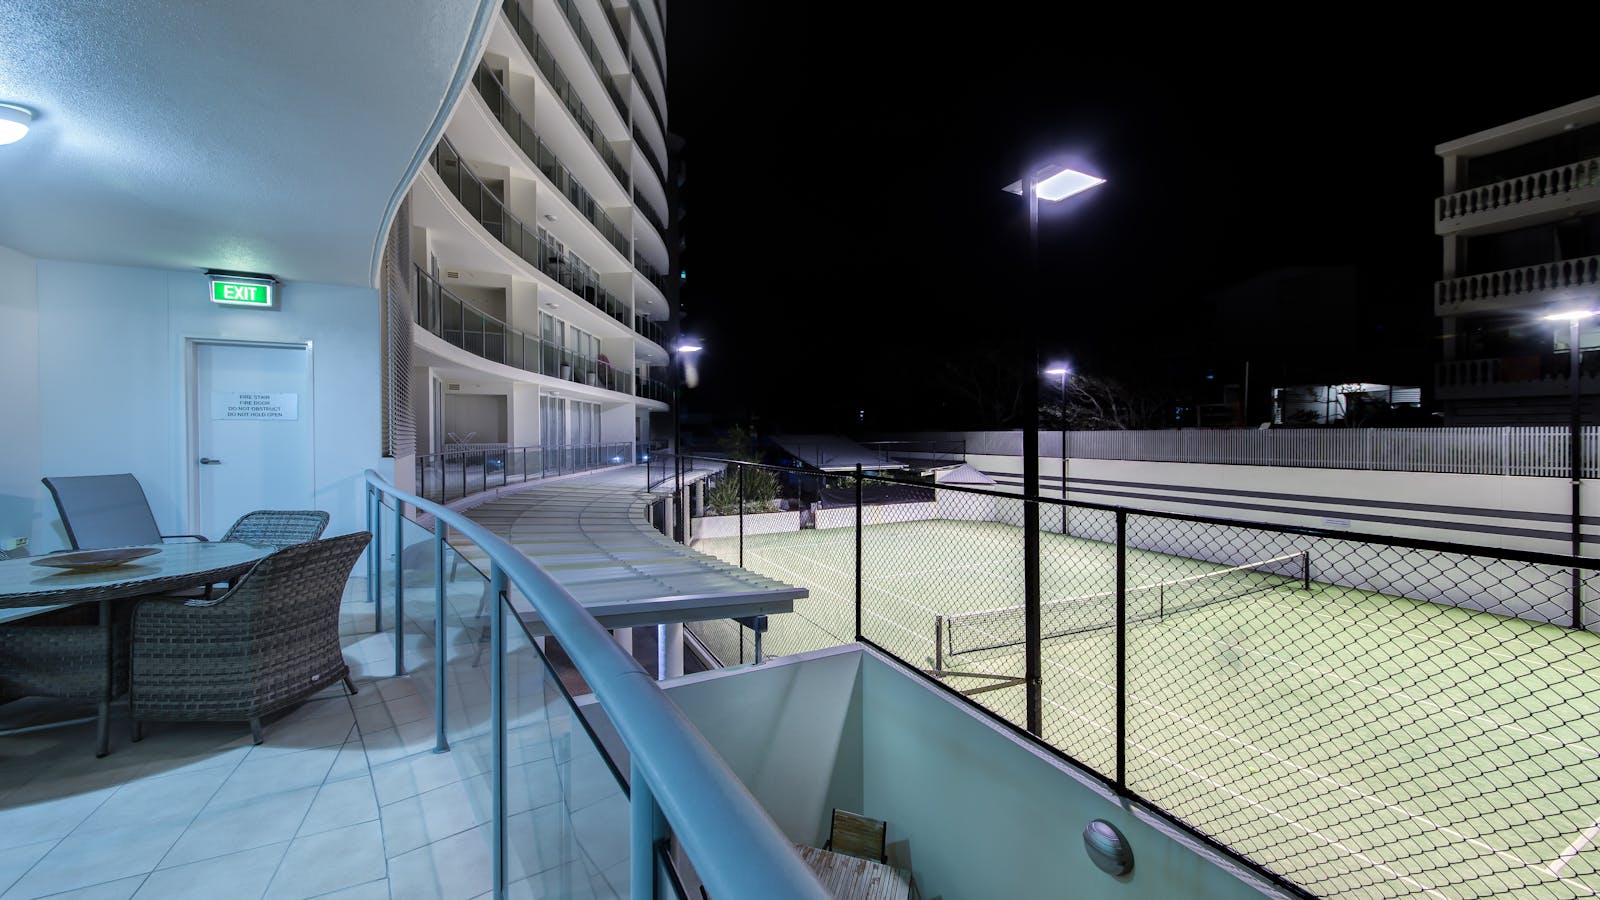 View of Tennis Court. With night lighting you can enjoy a game up to 9 at night